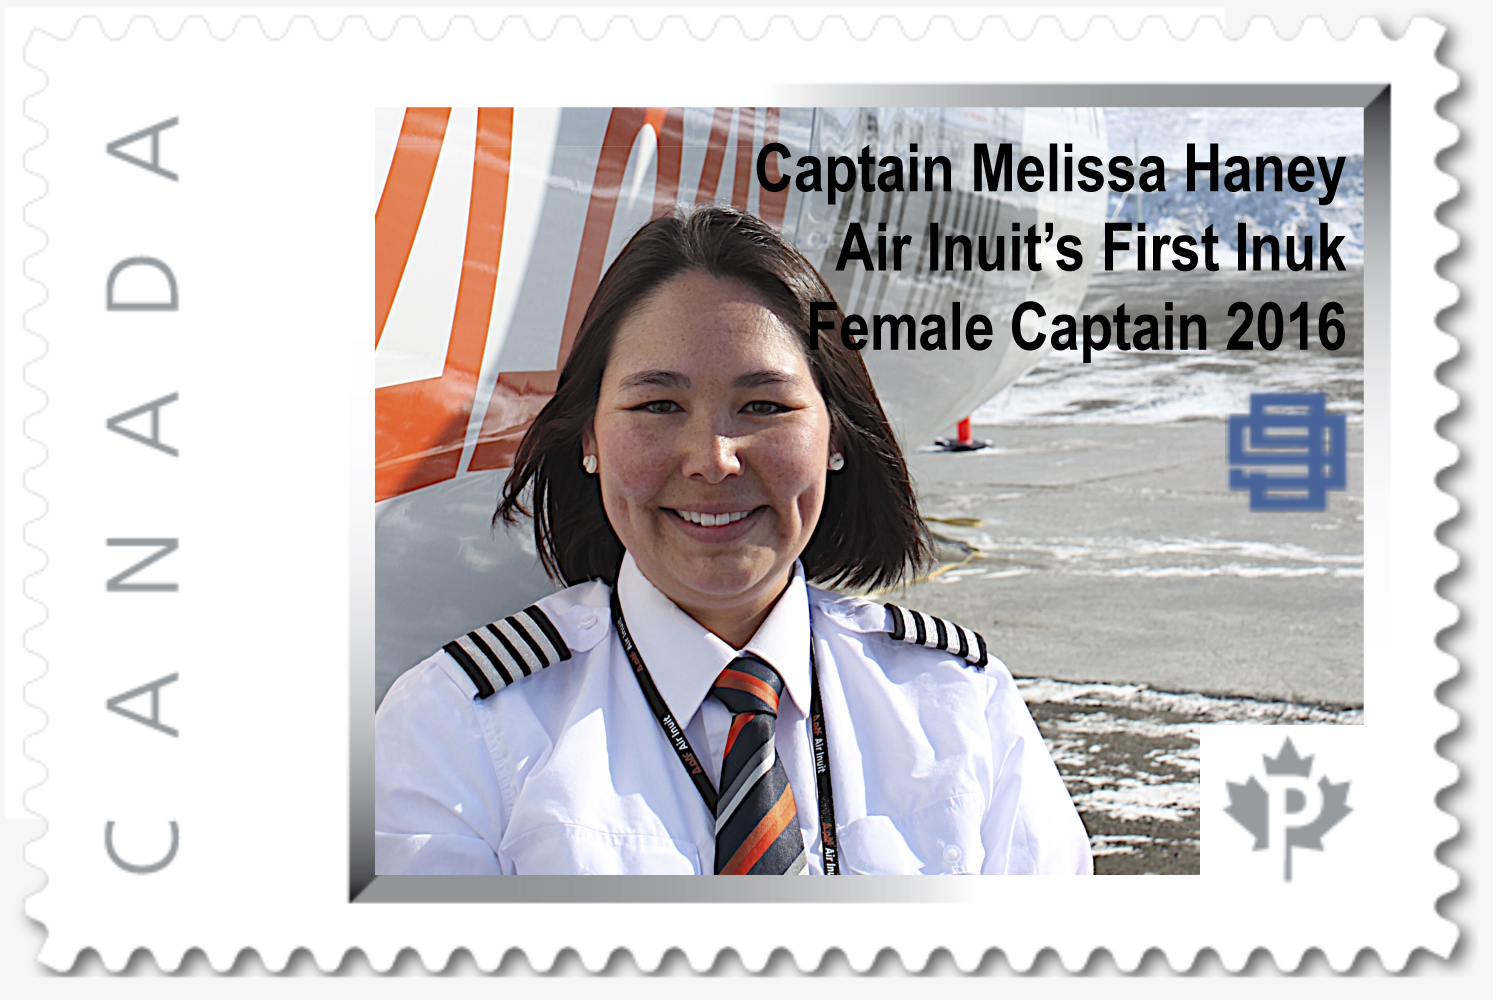 You are currently viewing New Stamp Issued 2017 Honouring Captain Melissa Haney